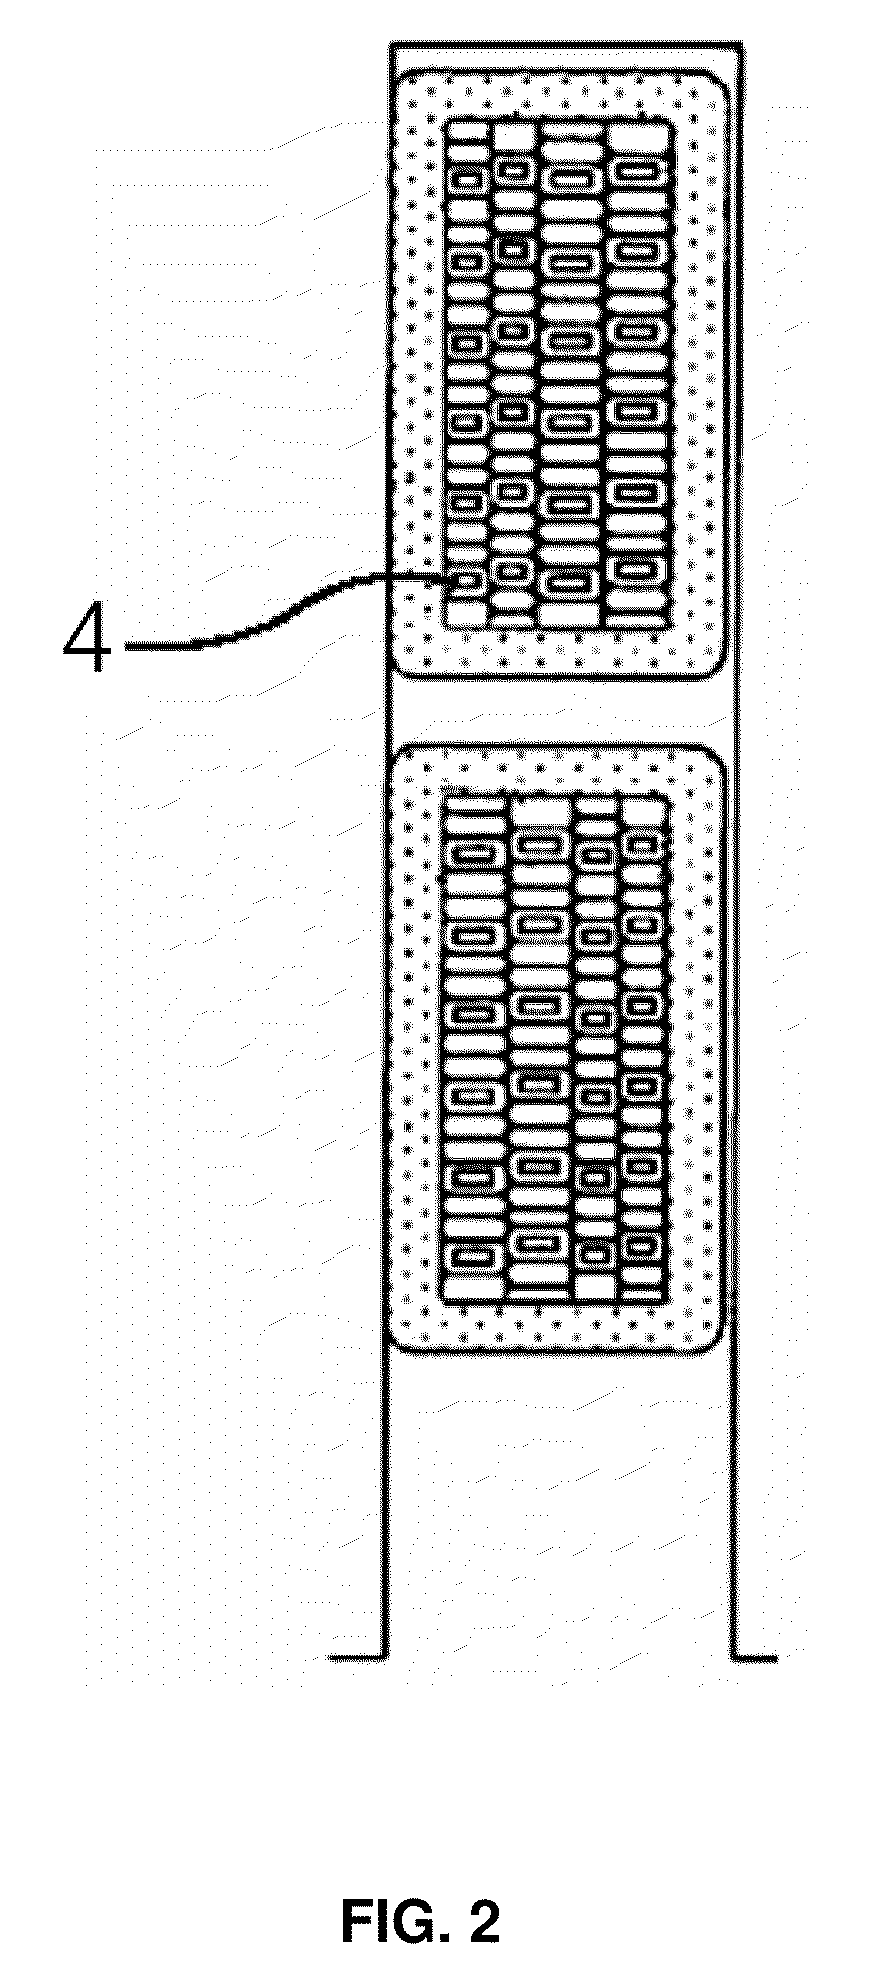 Stator cooling structure for superconducting rotating machine